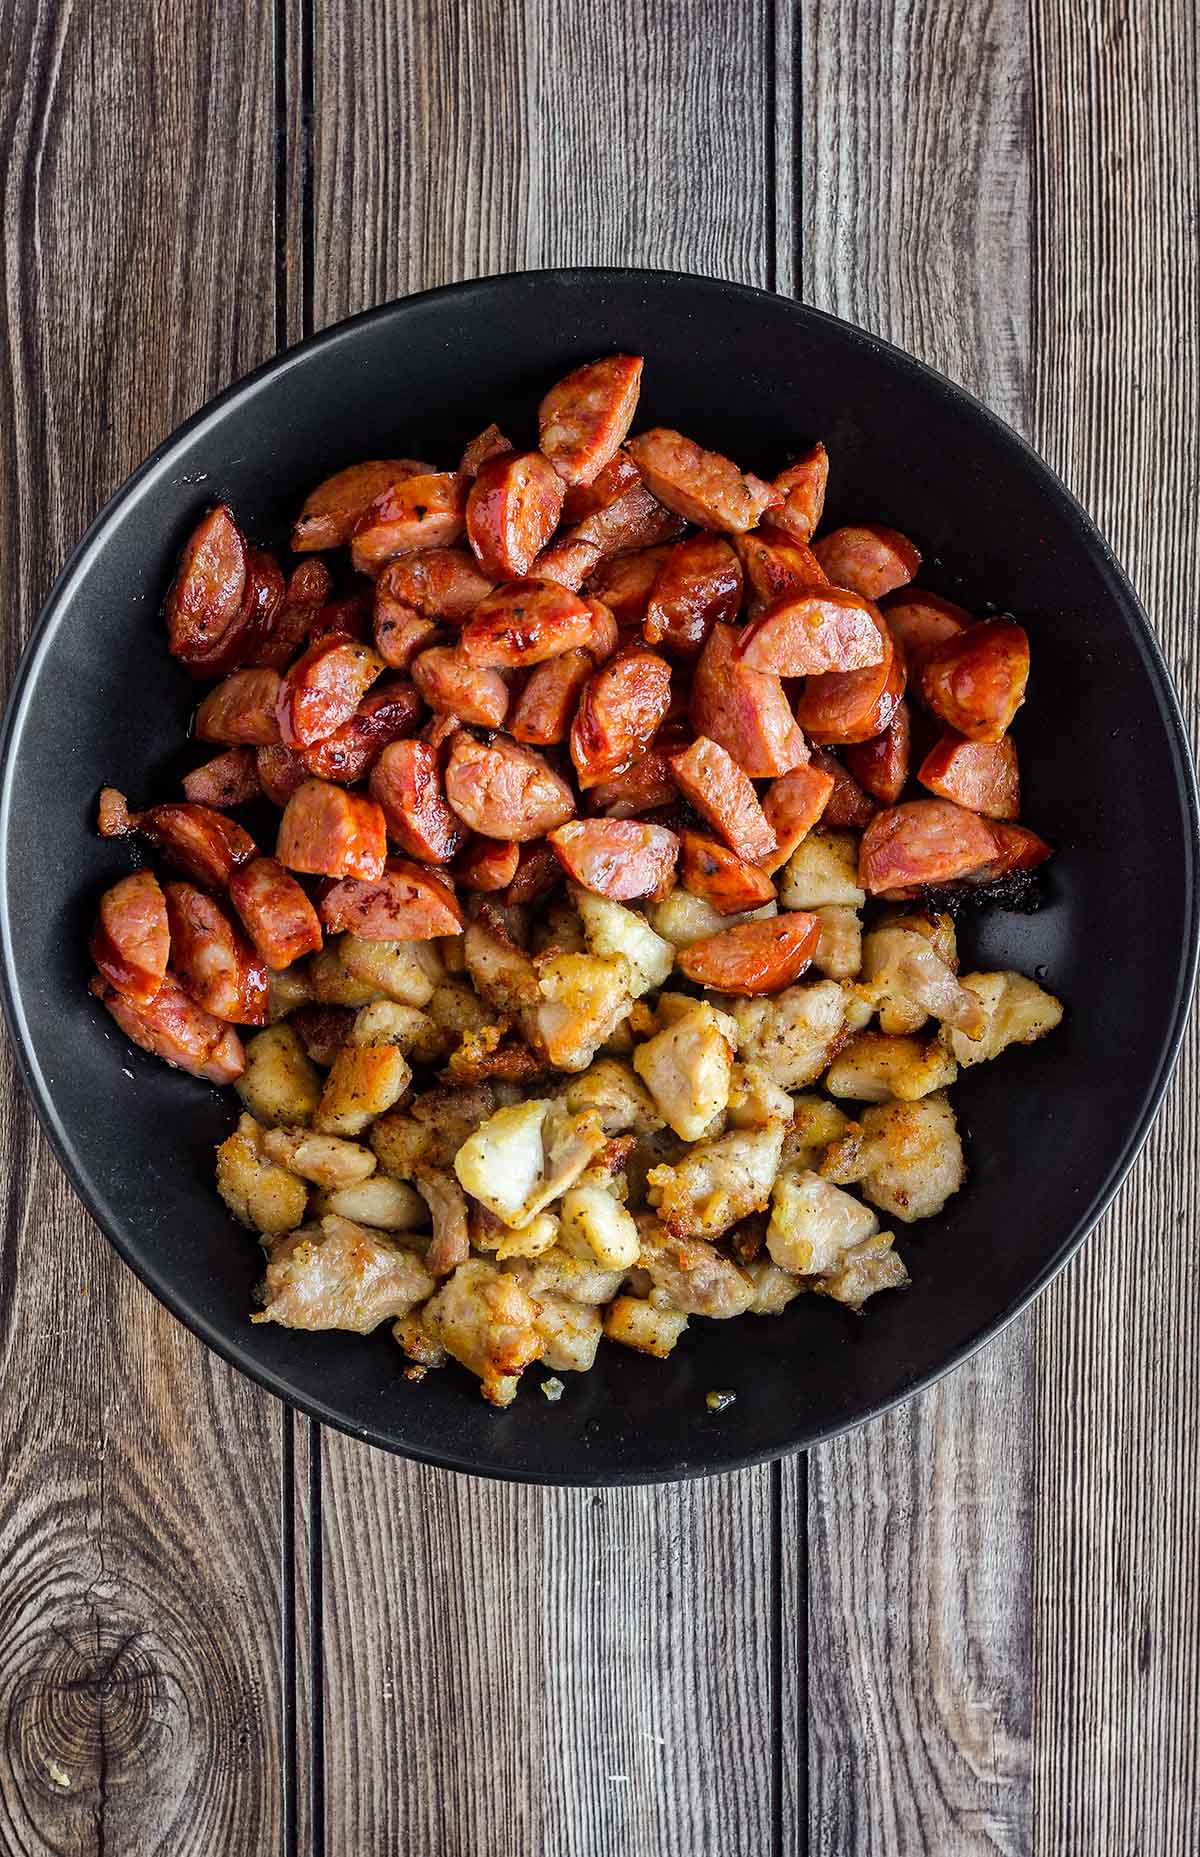 Cooked chicken and andouille sausage in a black bowl